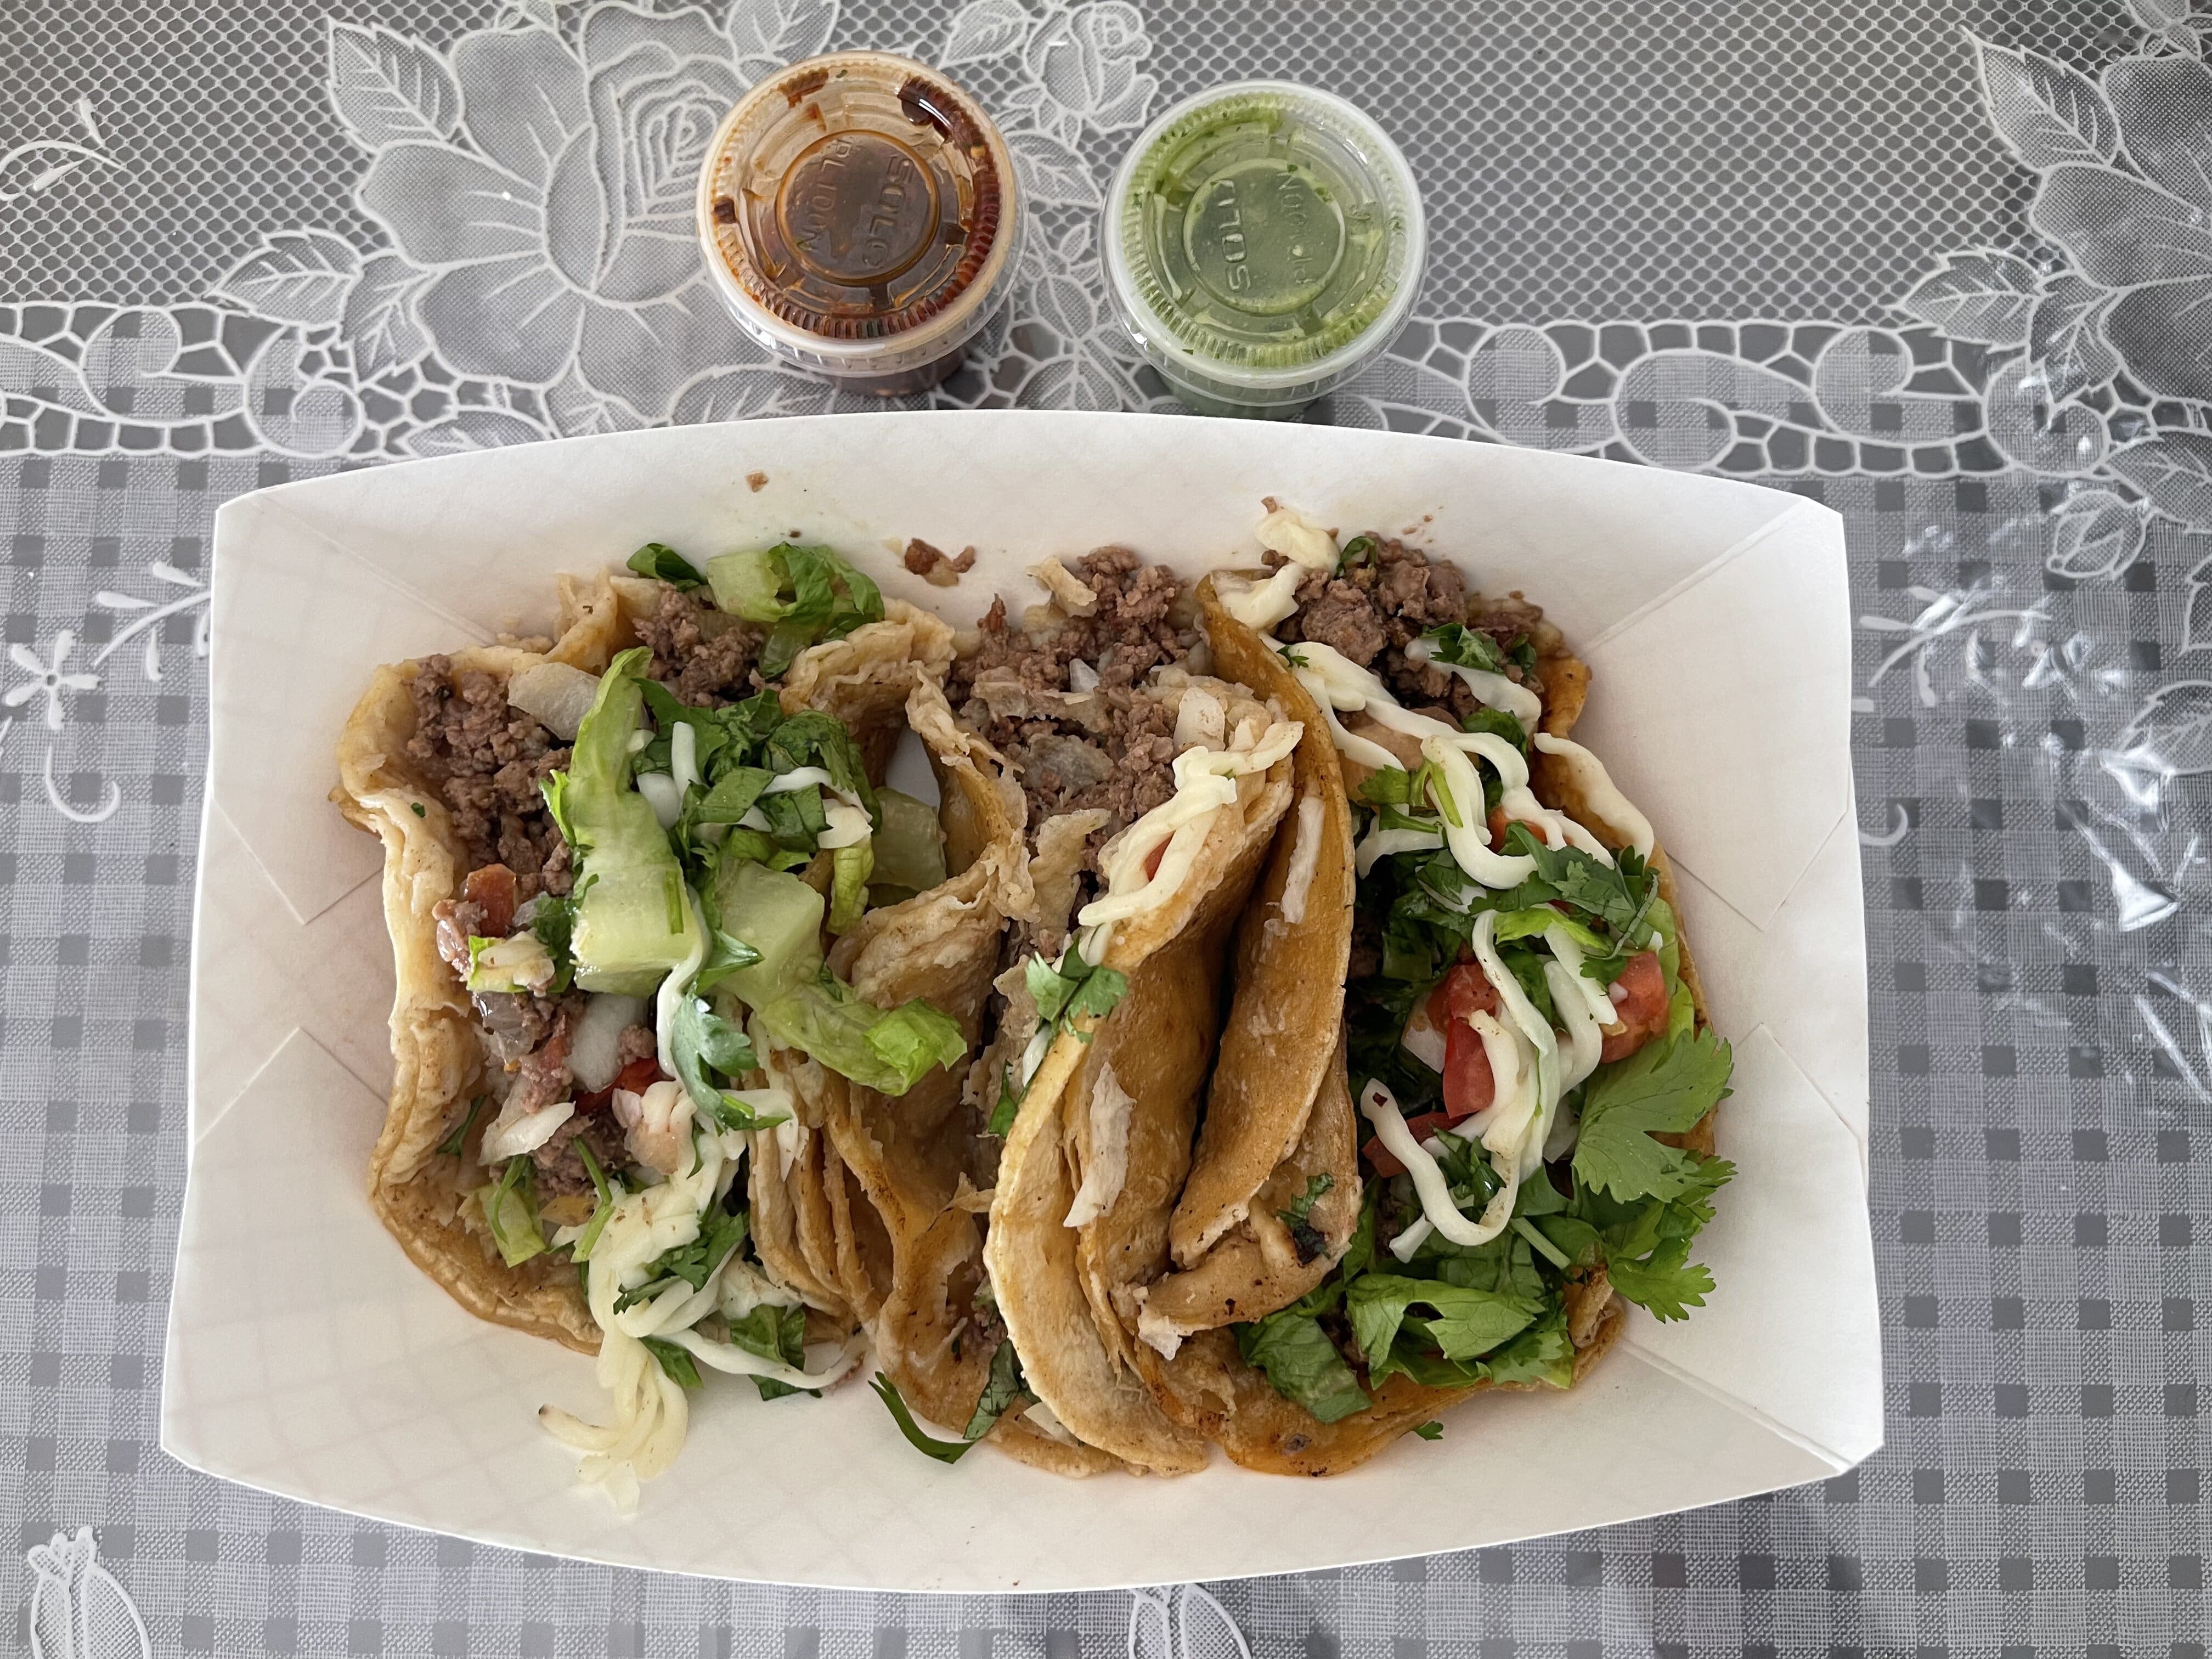 Enjoy tacos and more from Fernando’s food truck